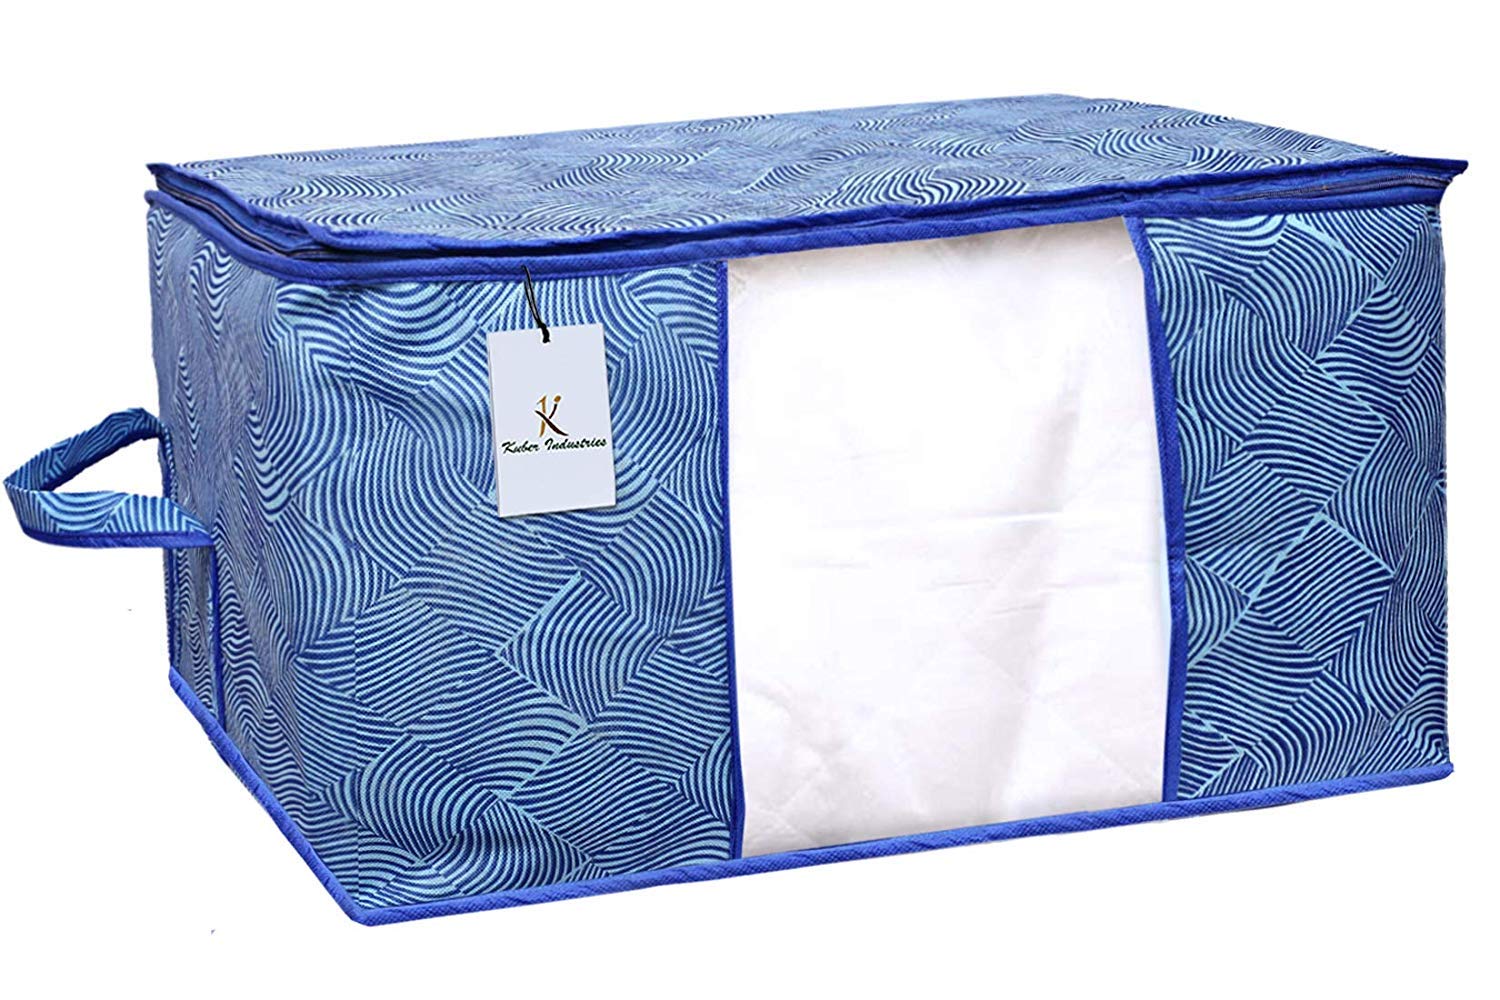 Kuber Industries Rectangular Laheriya Design Non Woven Underbed Blanket Cover with Transparent Window Storage Organizer Bag (Extra Large, Blue, CTKTC034507) - 2 Pieces